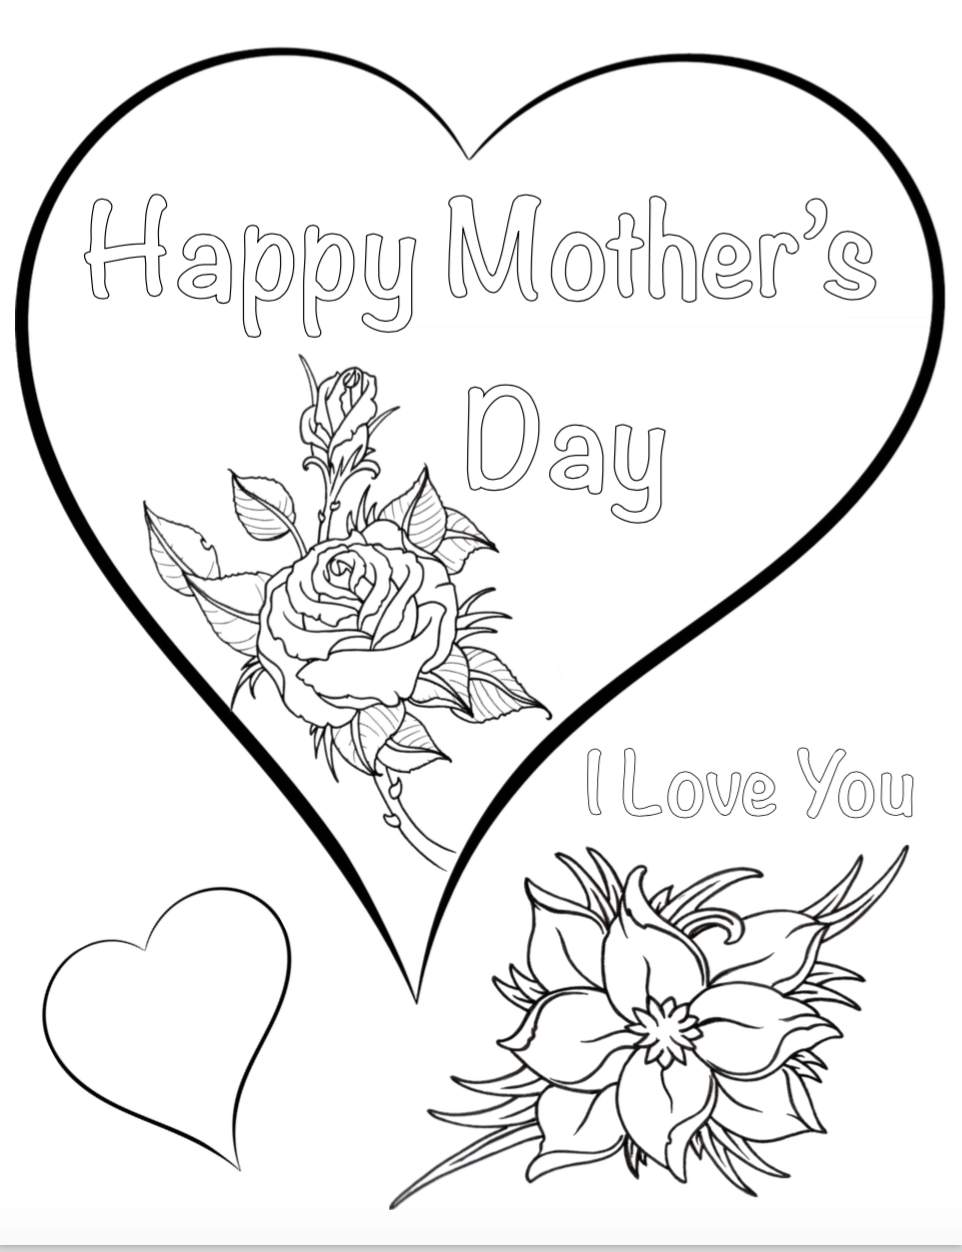 Coloring Page For Grandma 127  SVG Images File